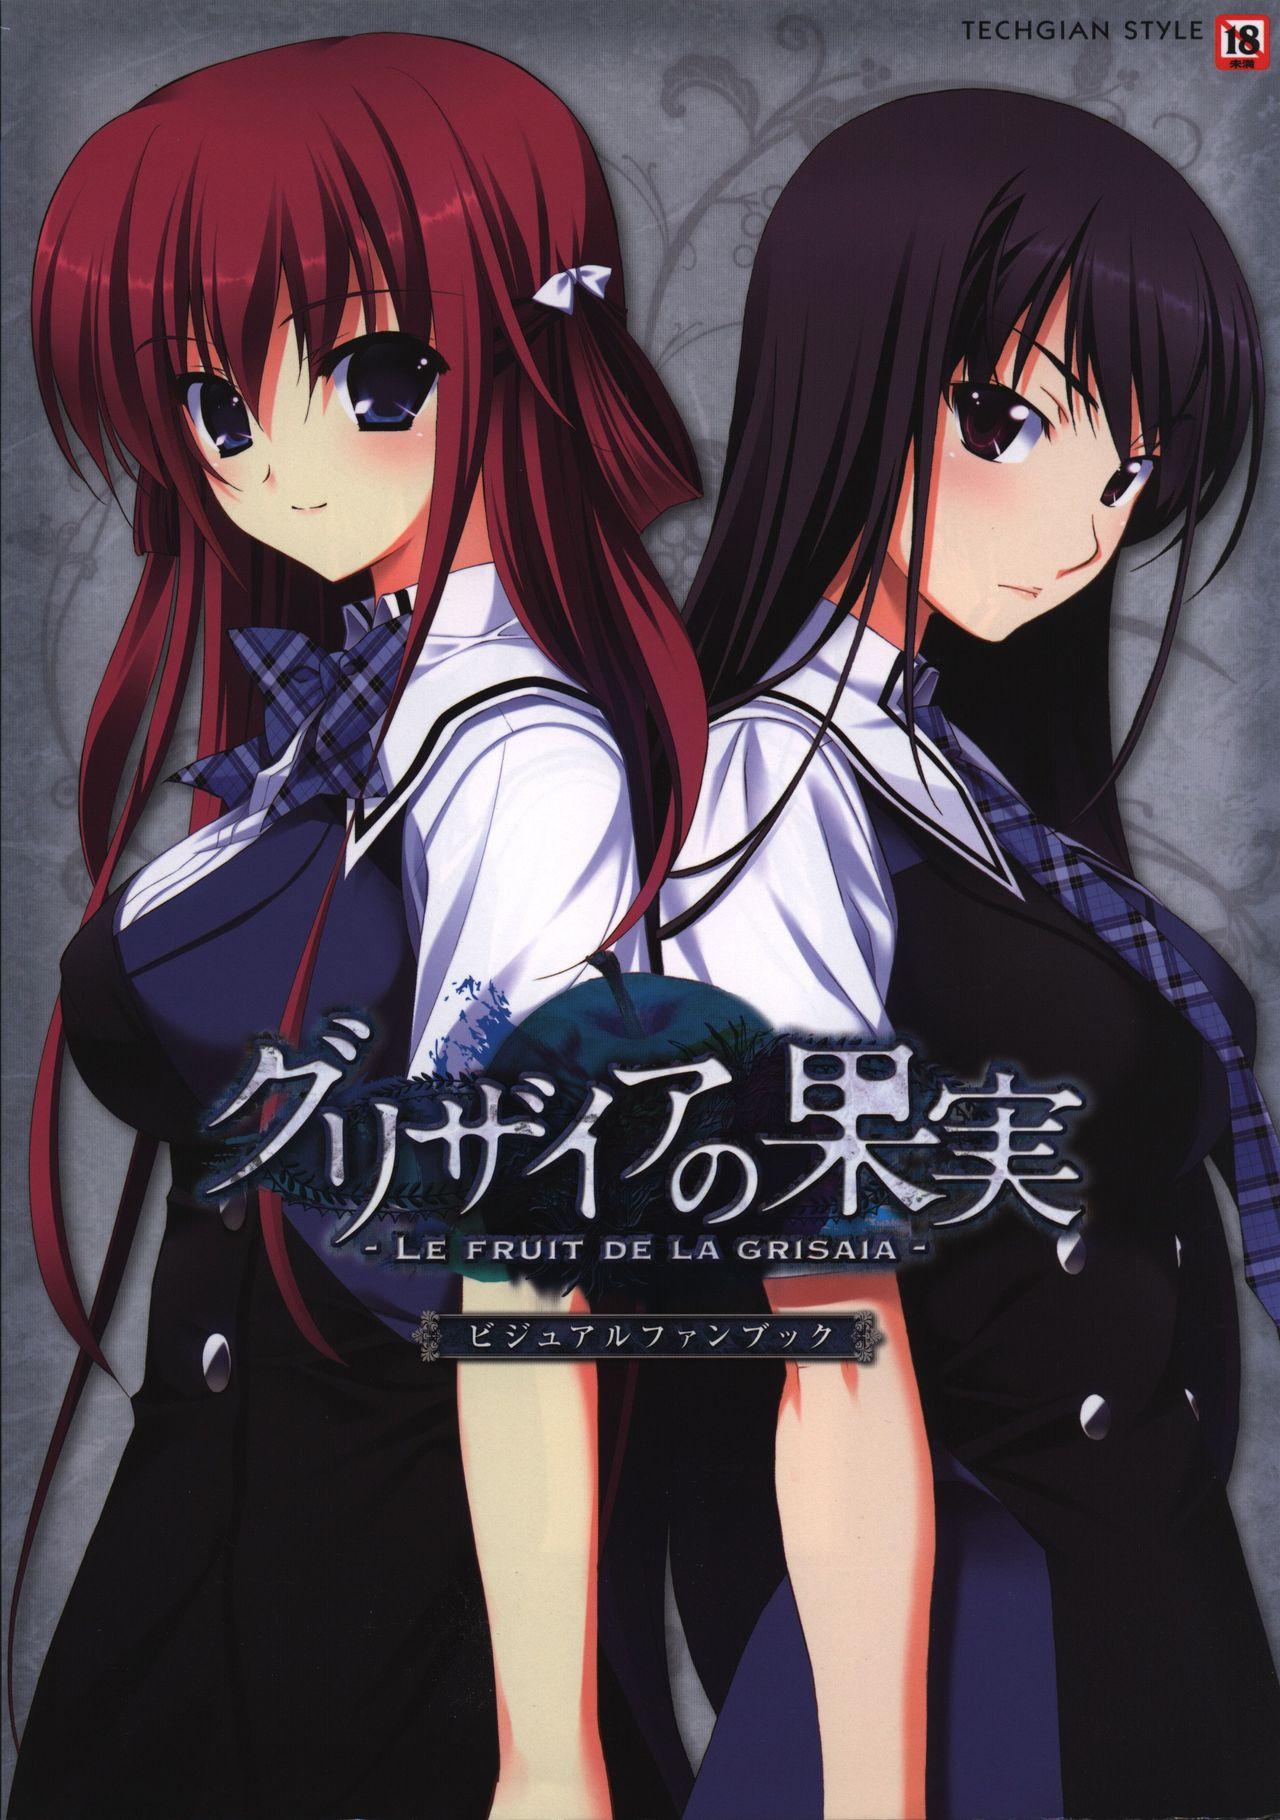 The Fruit of Grisaia Visual FanBook 0